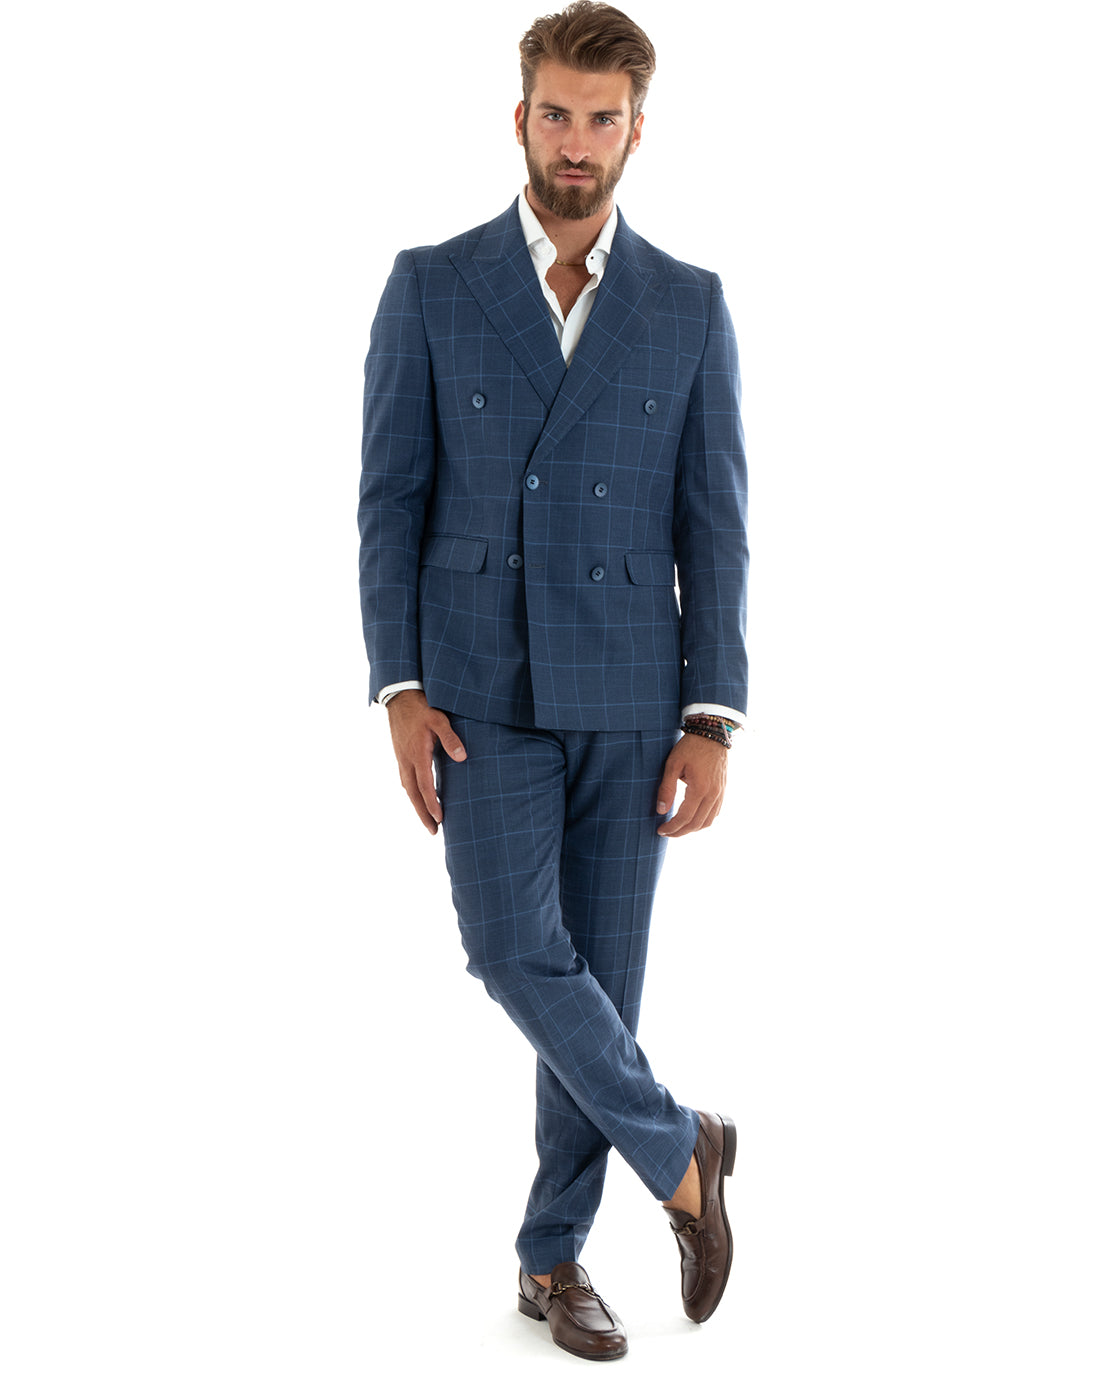 Double-Breasted Men's Suit Suit Jacket Trousers Blue Checked Elegant Casual GIOSAL-OU2402A